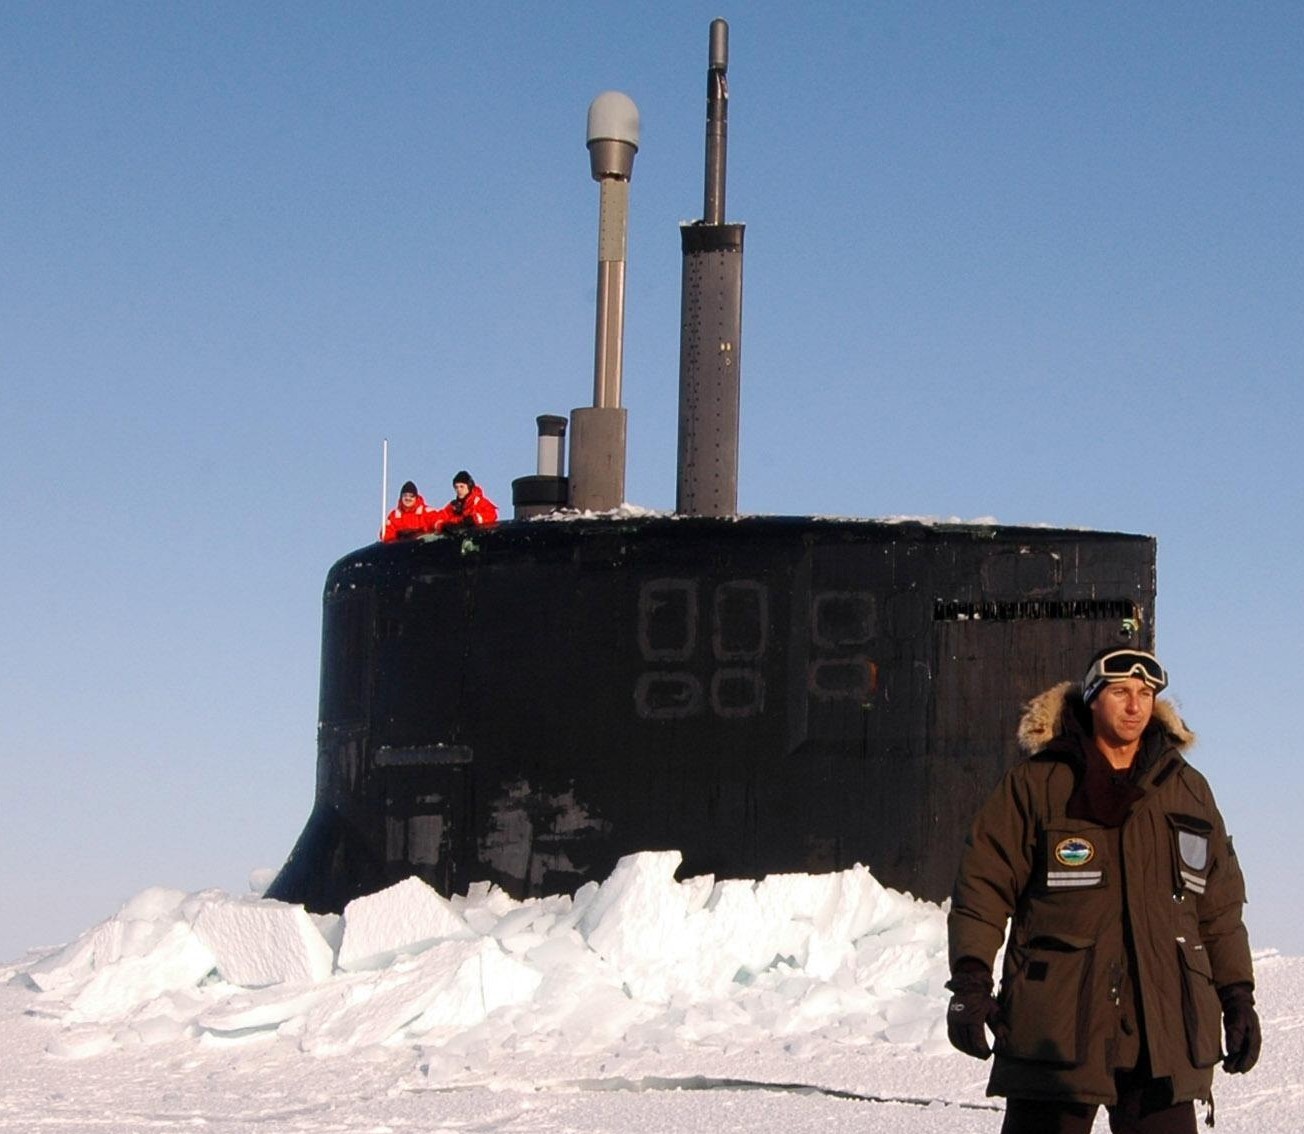 ssn-22 uss connecticut seawolf class attack submarine us navy exercise icex 11 arctic ocean 17